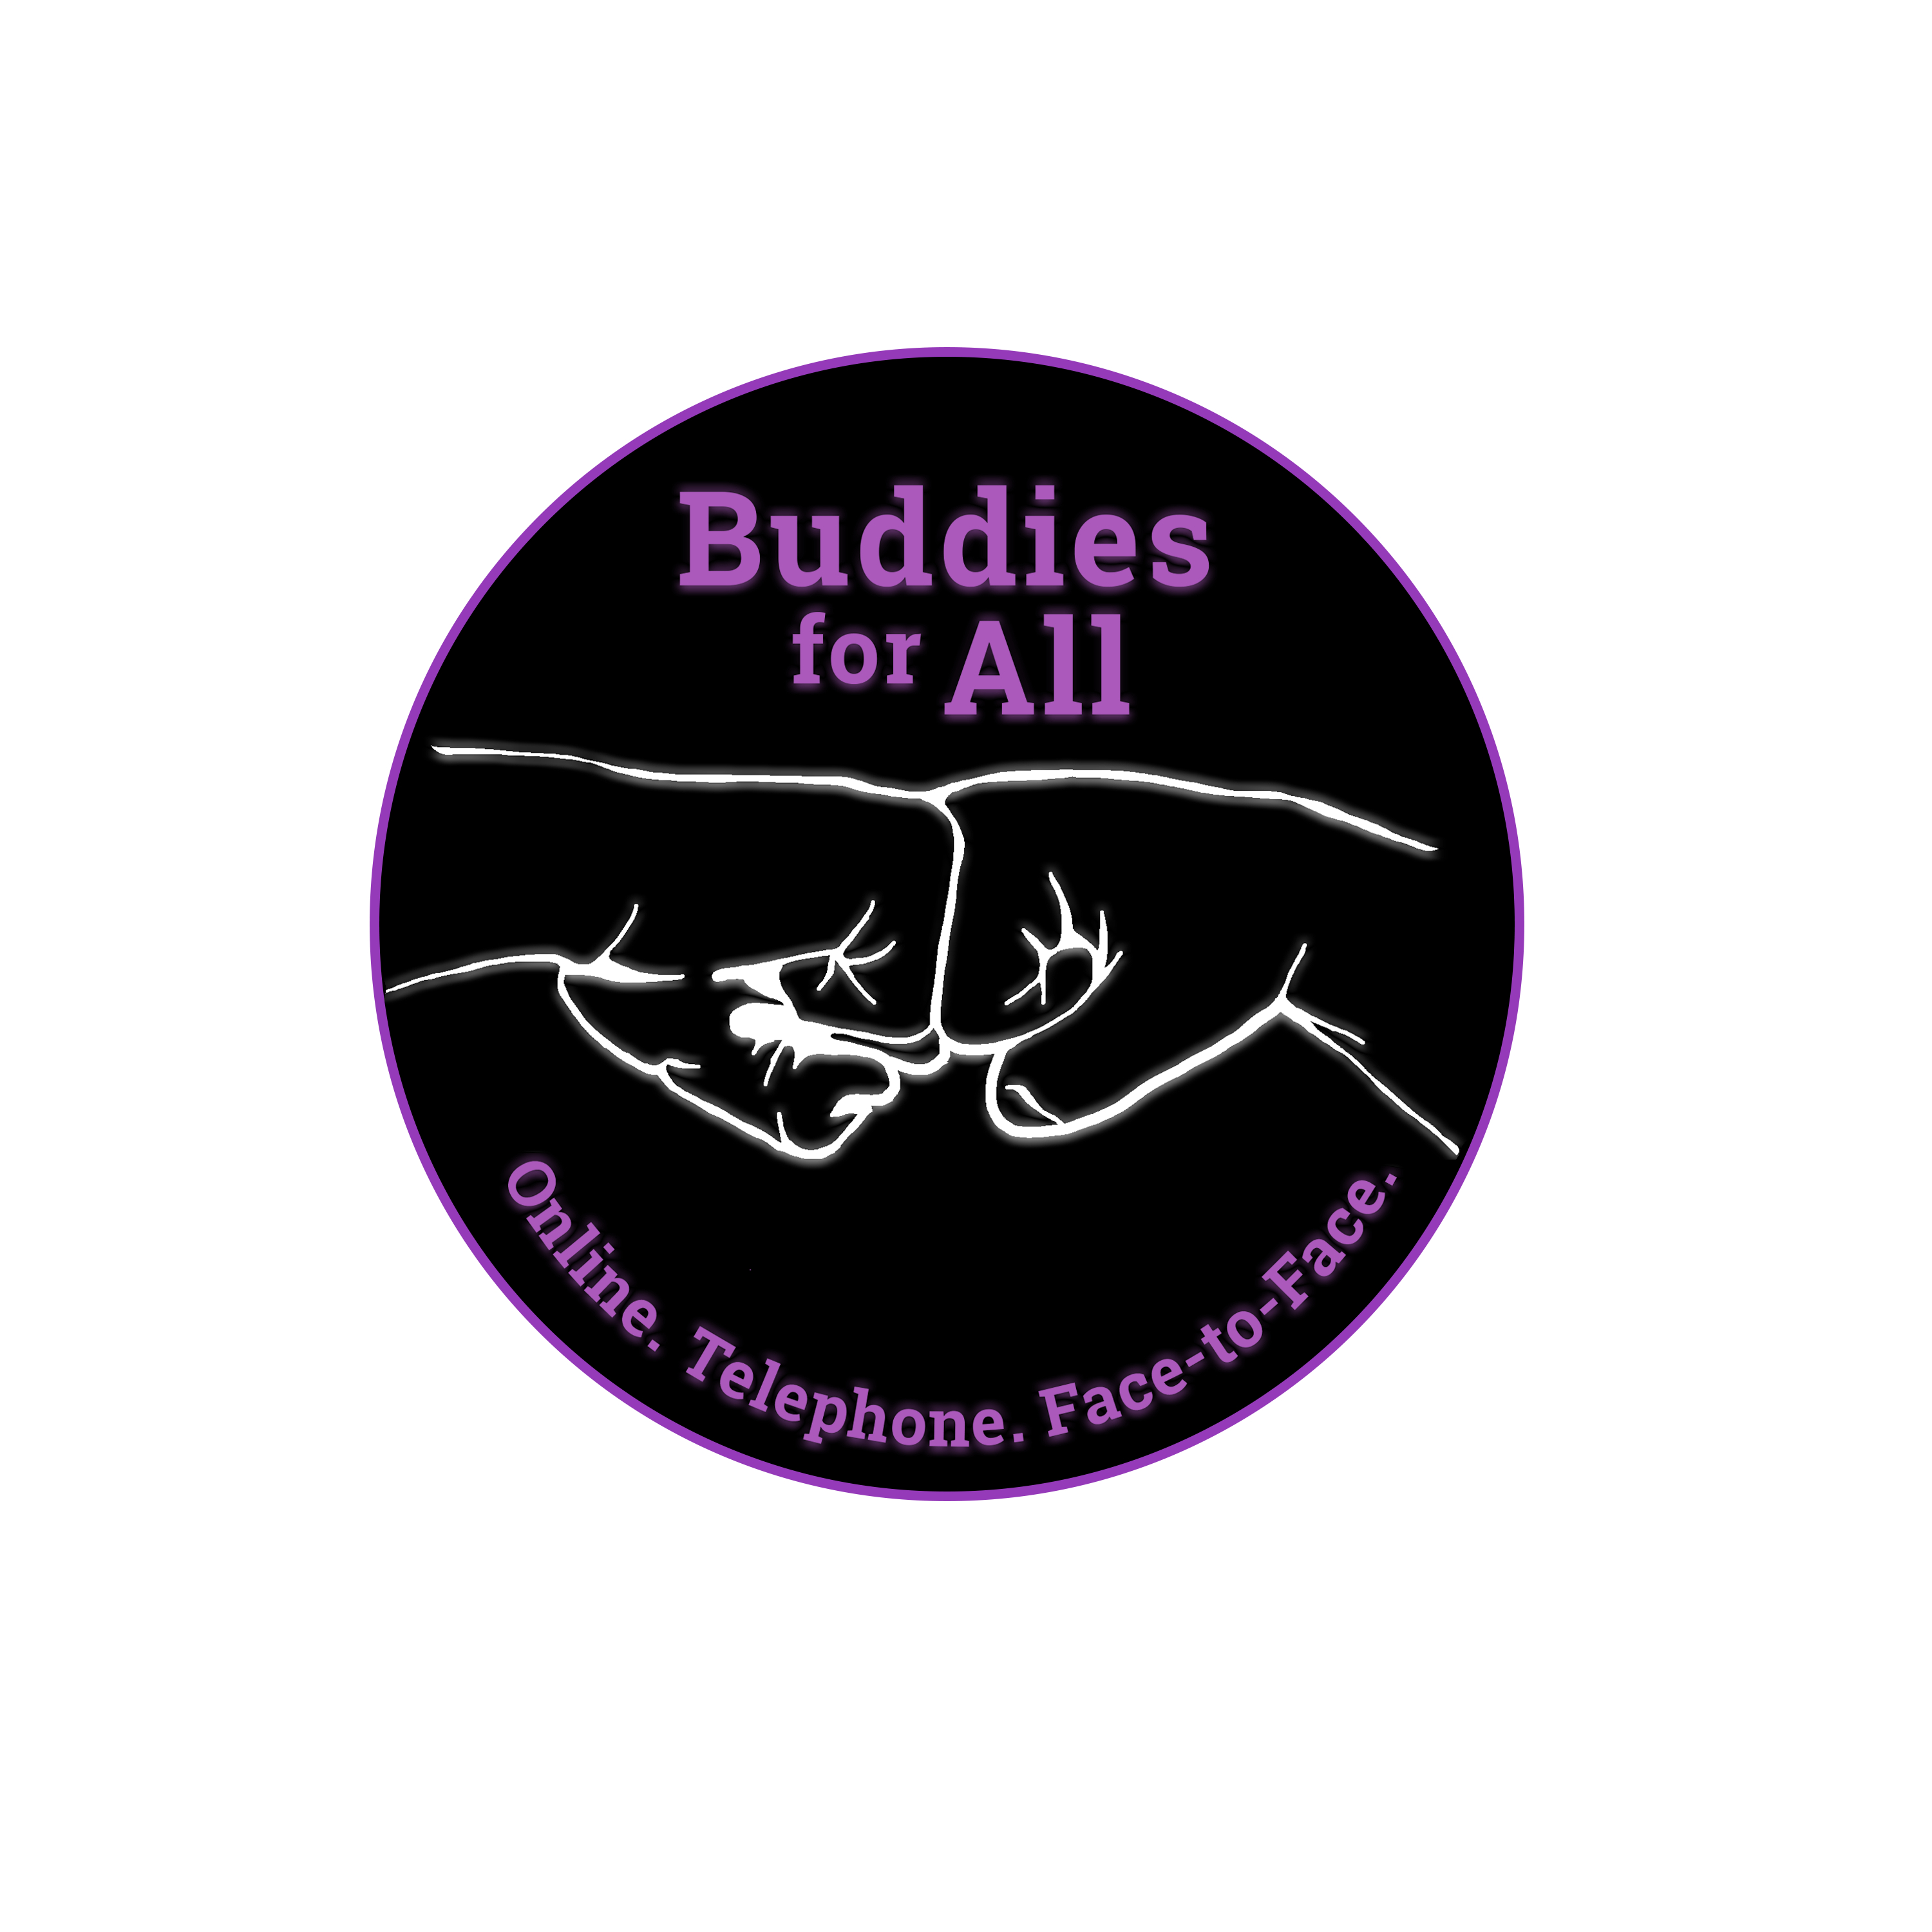 The Buddies for All logo - A black circle and the text Buddies for All with two white fist bumps underneath the text. Then the words Online. Telephone. Face-to-Face. All text is purple.